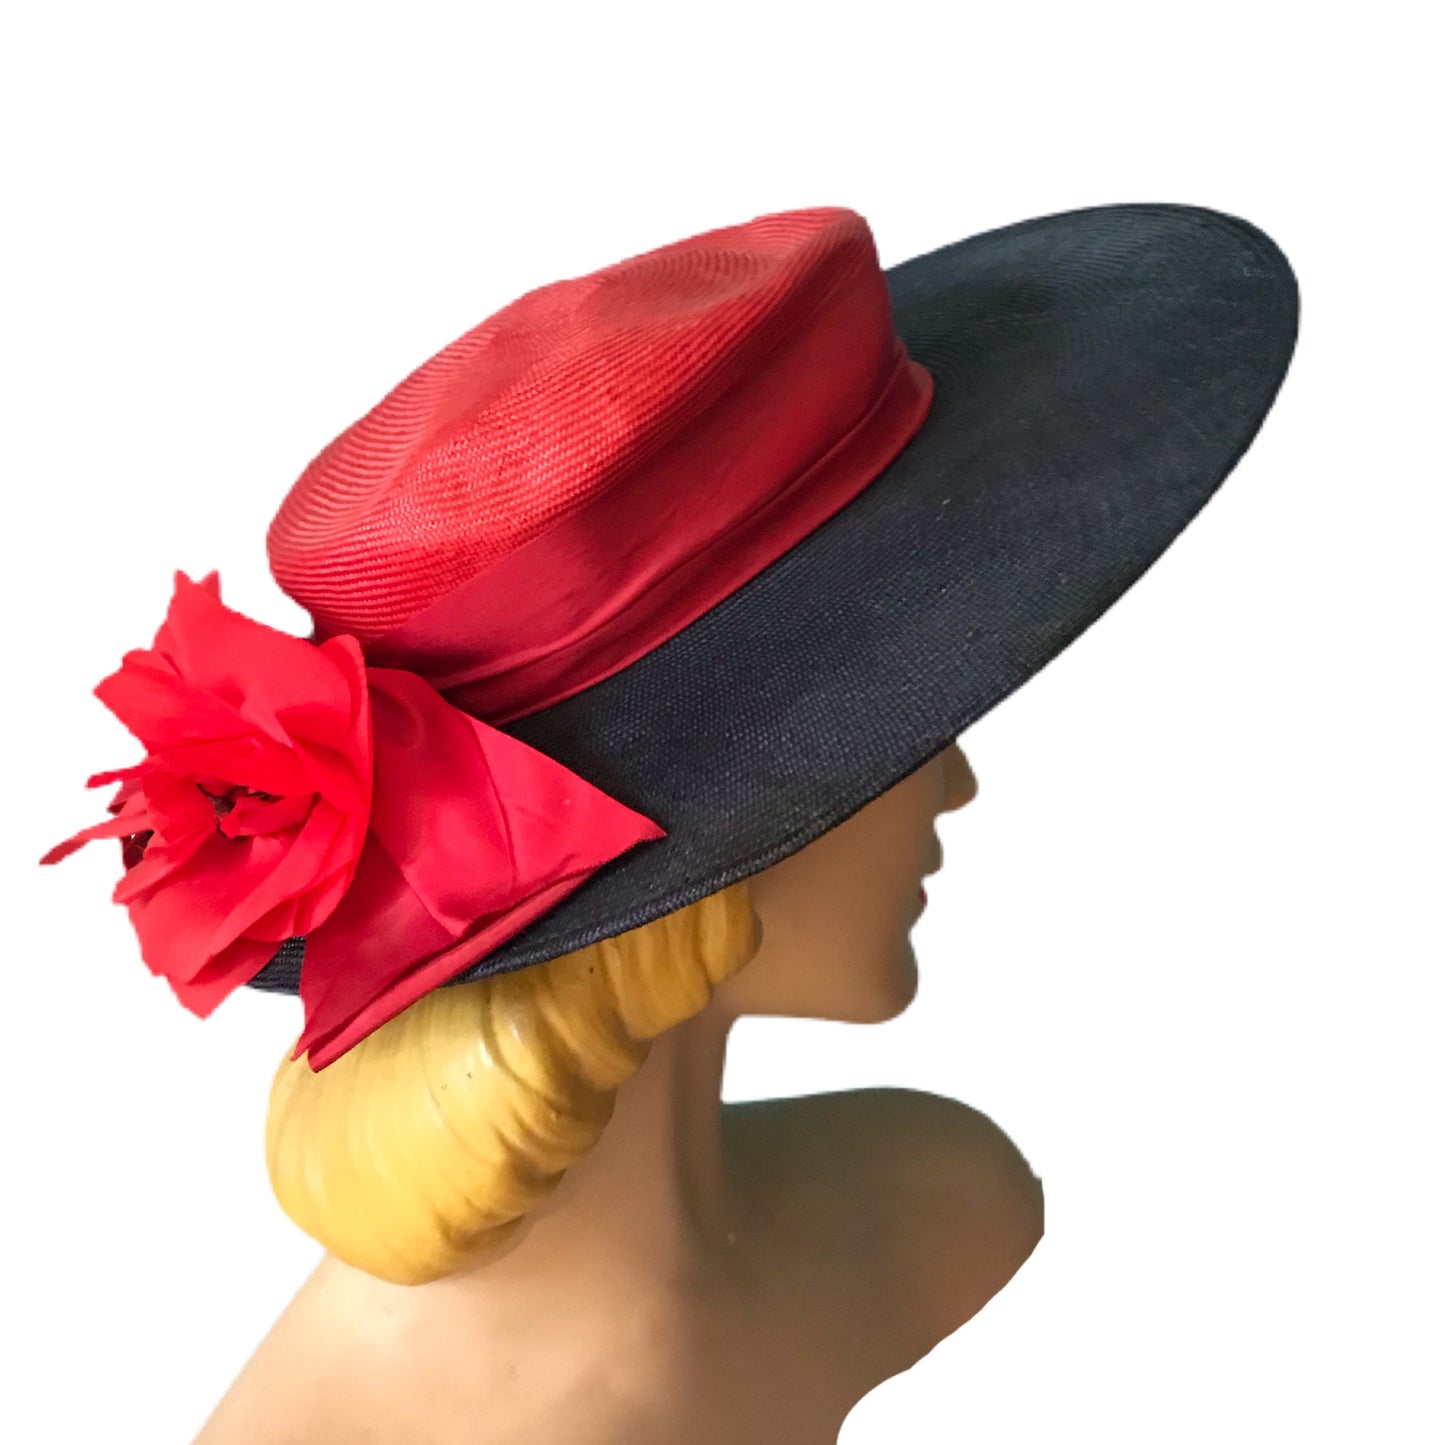 Black and Red Wide Brimmed Hat with Red Poppy and Bow circa 1960s